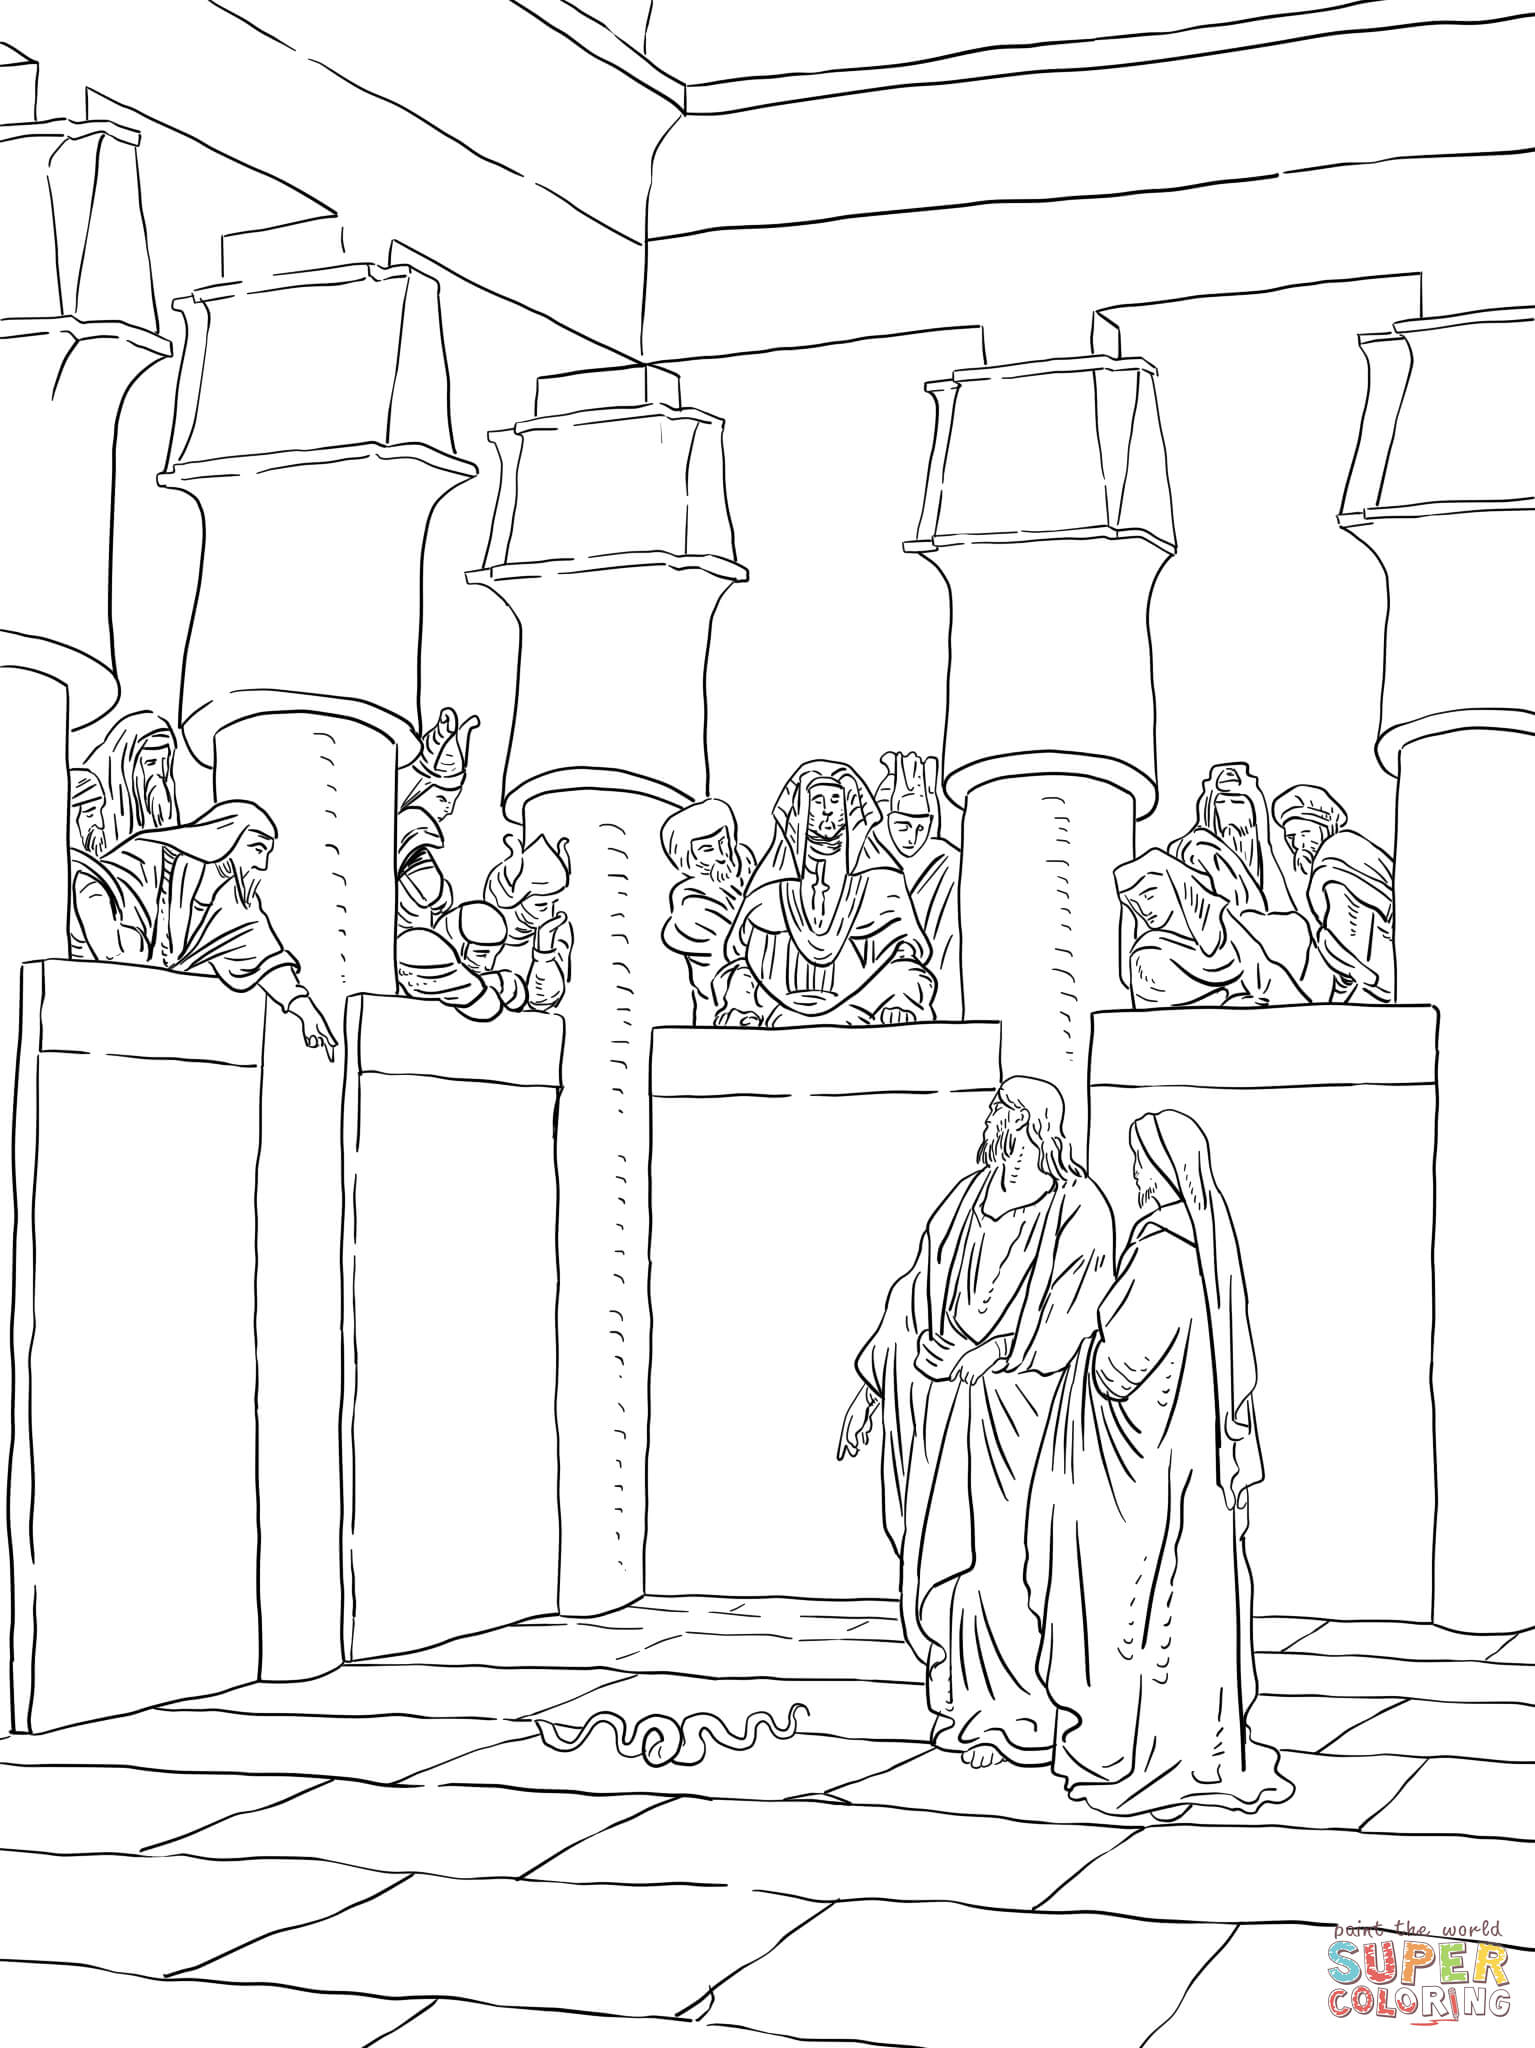 Moses coloring pages | Free Coloring Pages